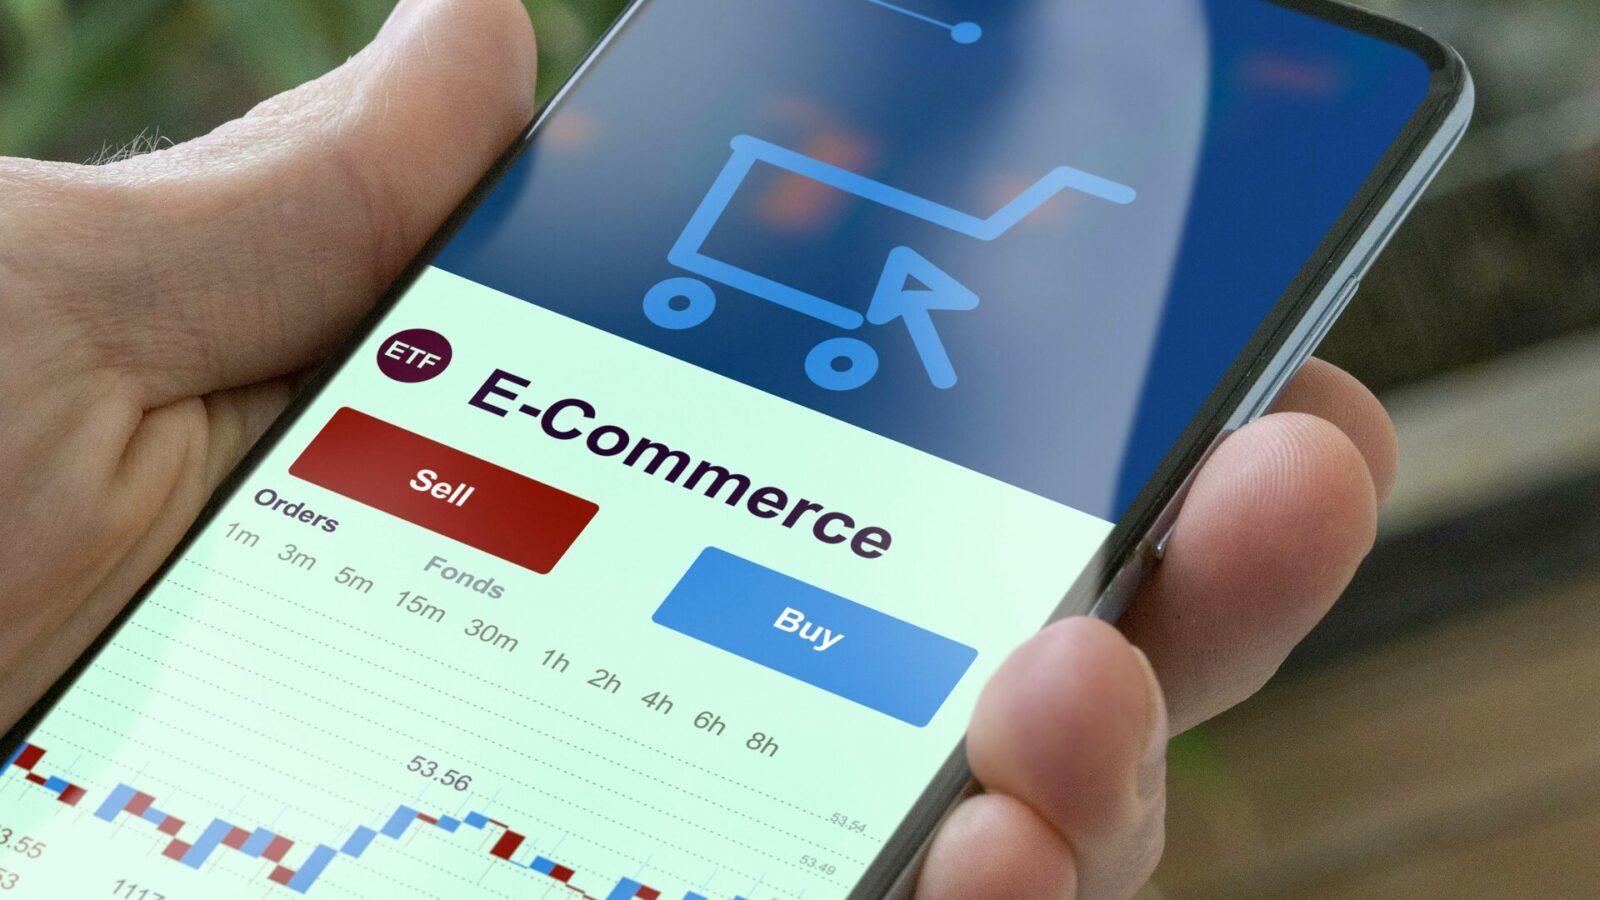 Invest in e-commerce ETF, an investor buys or sell an etf fund e commerce blue chips stock, electronic commerce fund share.